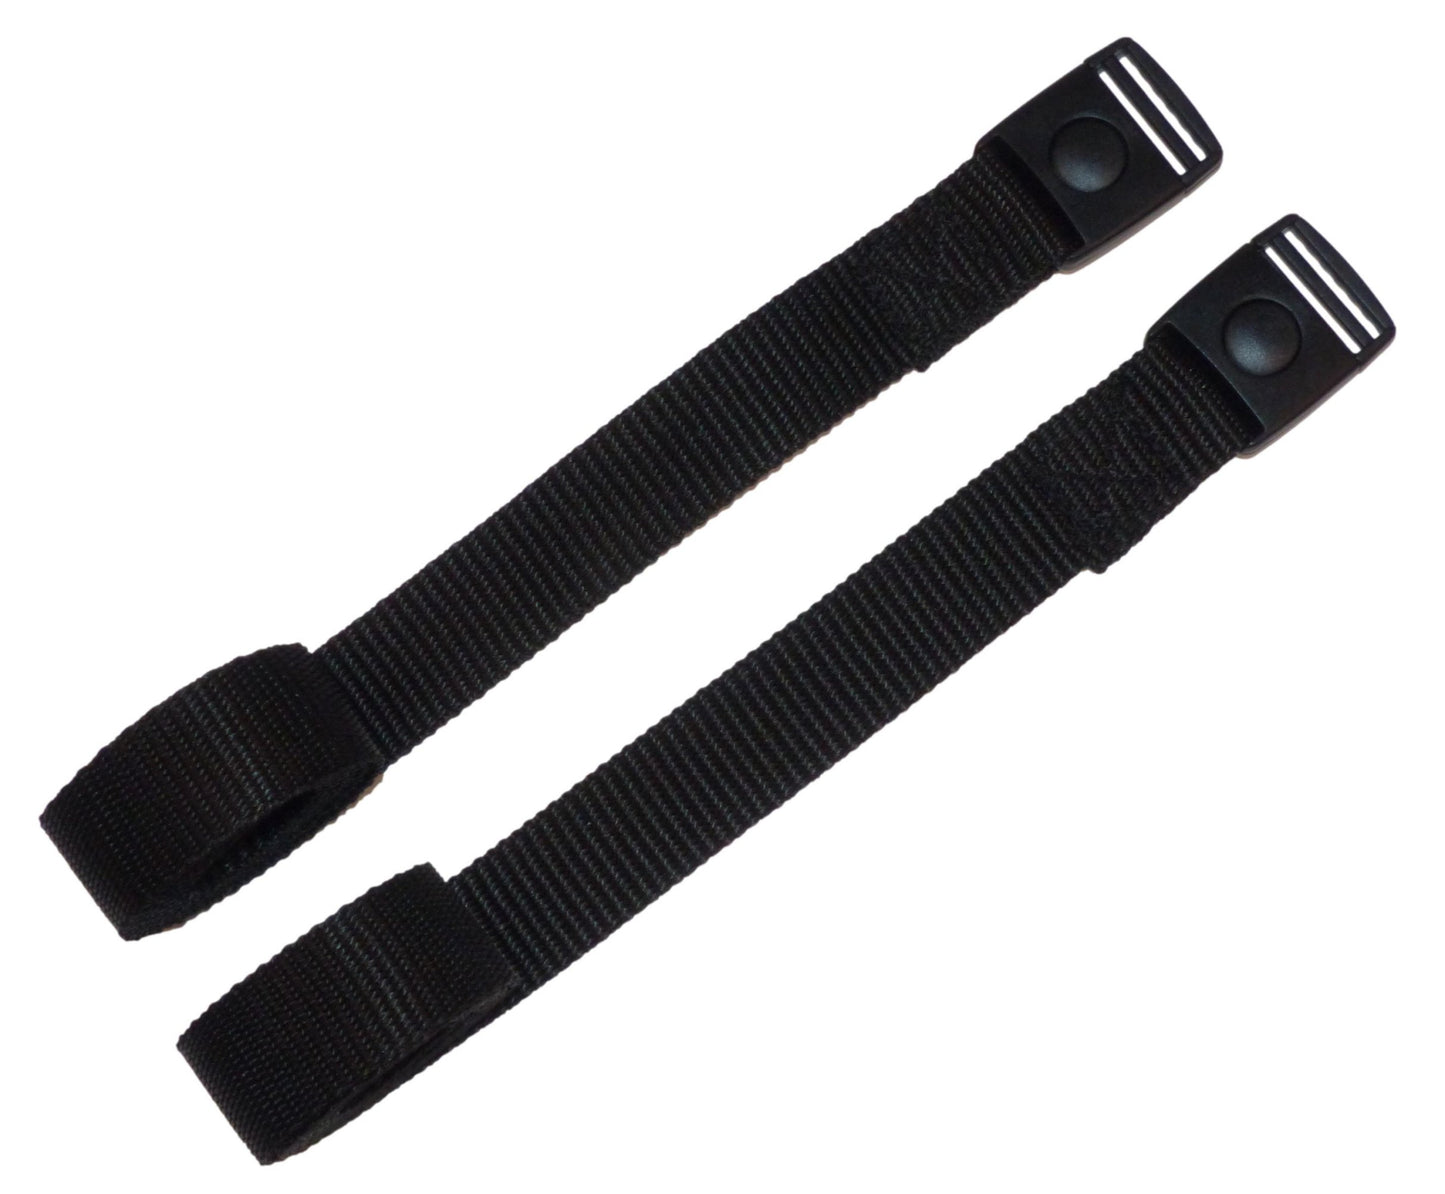 Benristraps 25mm Webbing Strap with Button Release Buckle (Pair) in black